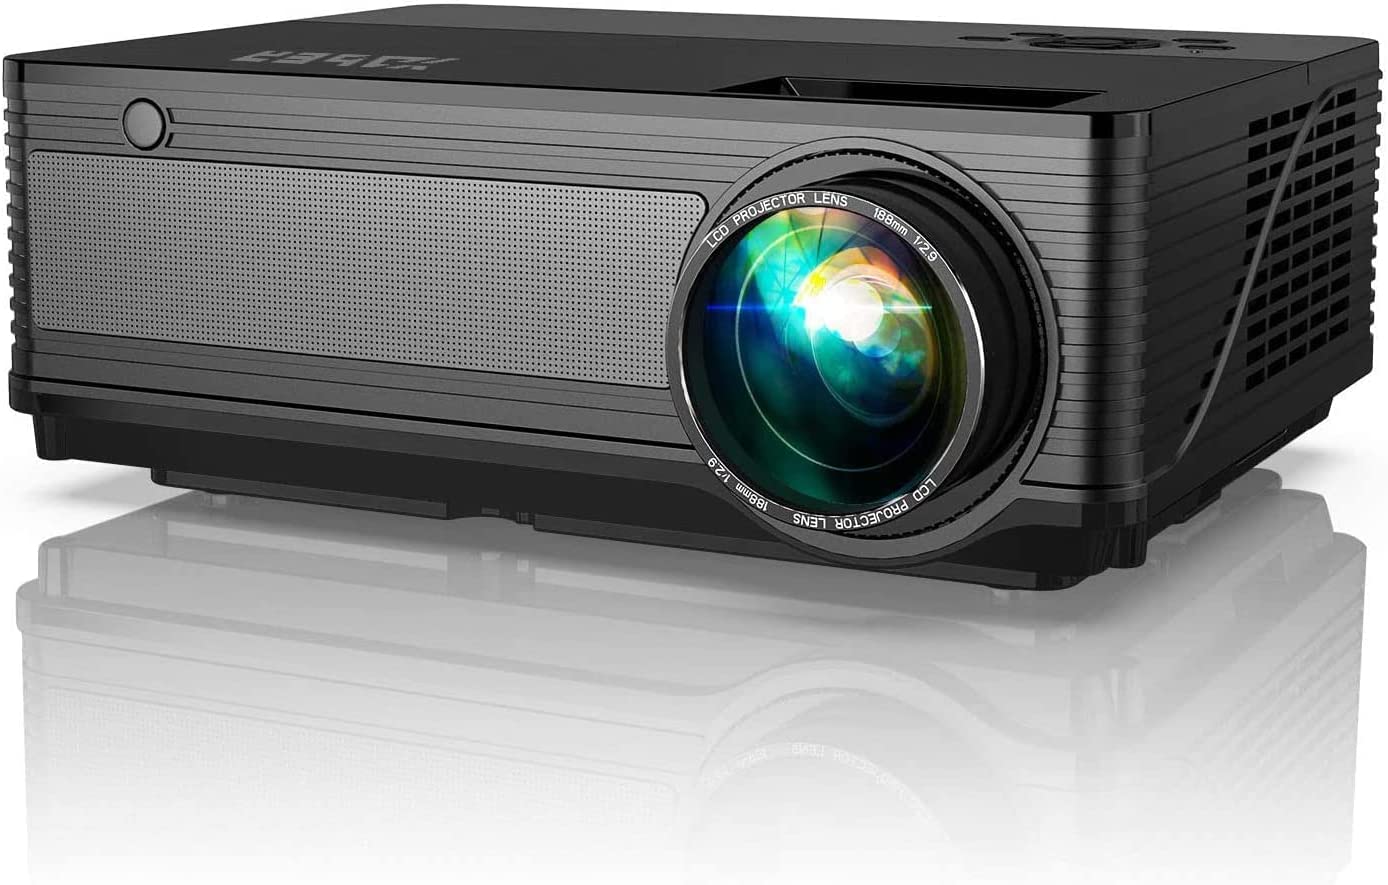 YABER Projector 8000 Lumen 1080P Native LED Projector Full HD Support 4K &±50° 4D Keystone 1920 x 1080 with 350 Display